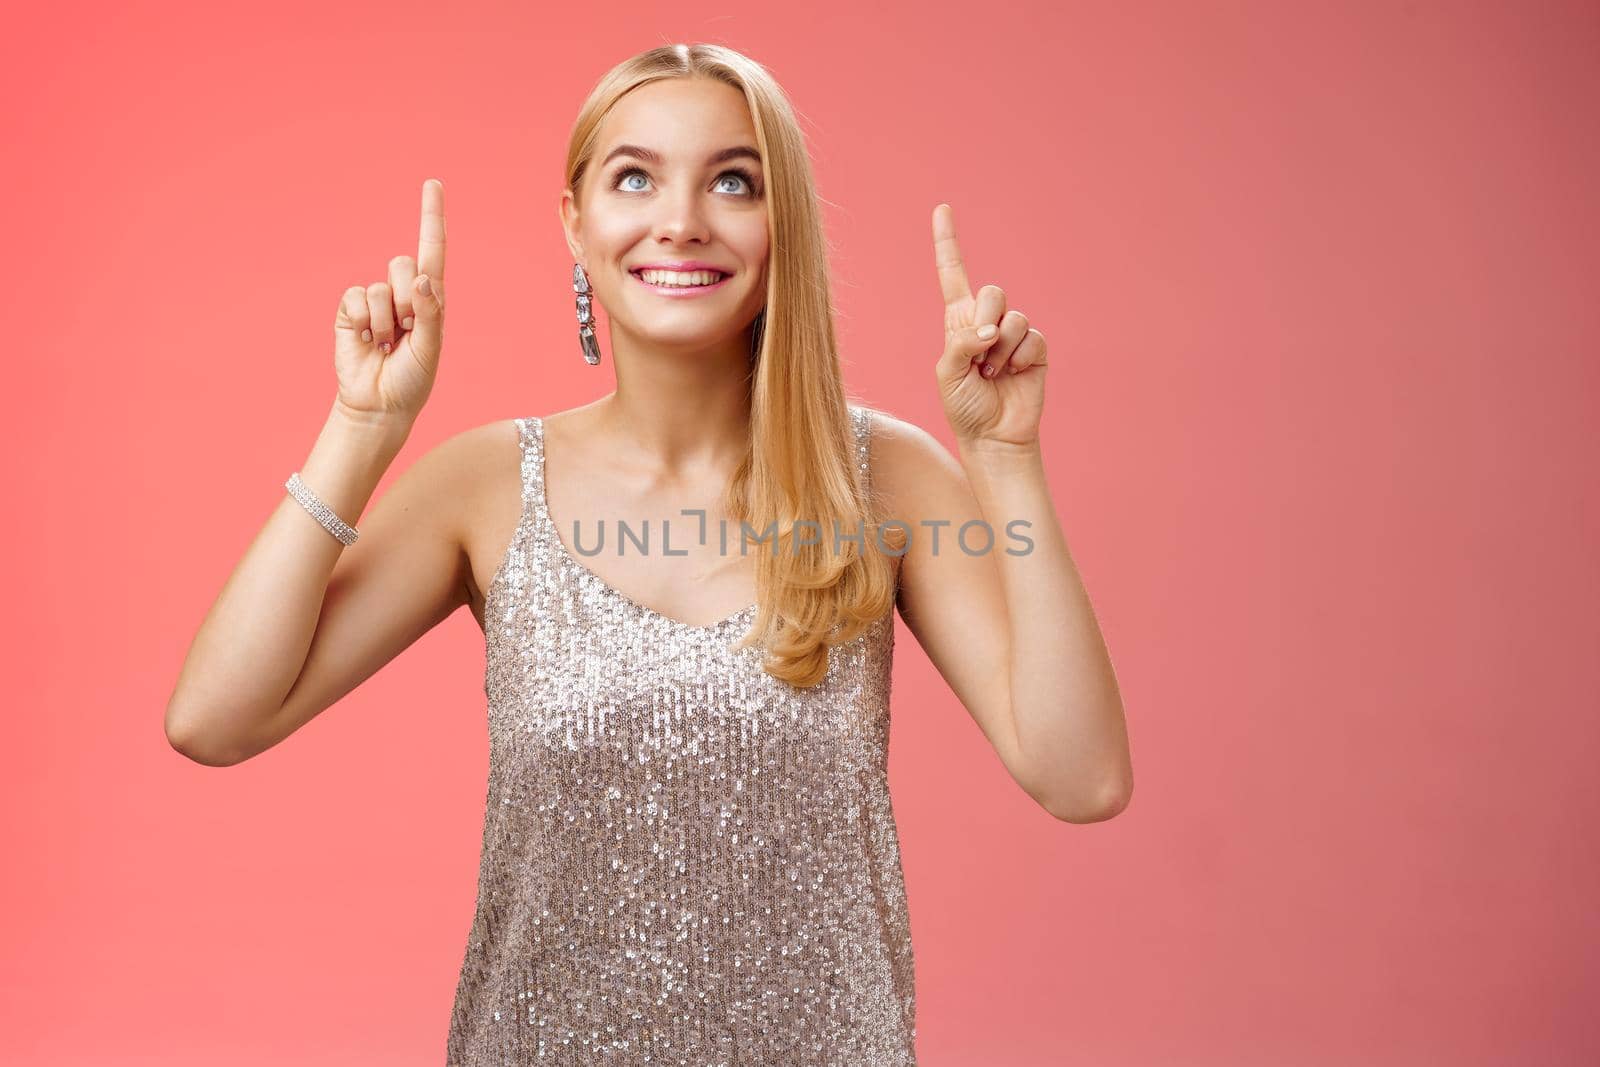 Amused gorgeous tender elegant european woman blond long hairstyle in silver glittering evening dress look pointing up curious gaze excitement see desired thing, standing red background joyful.